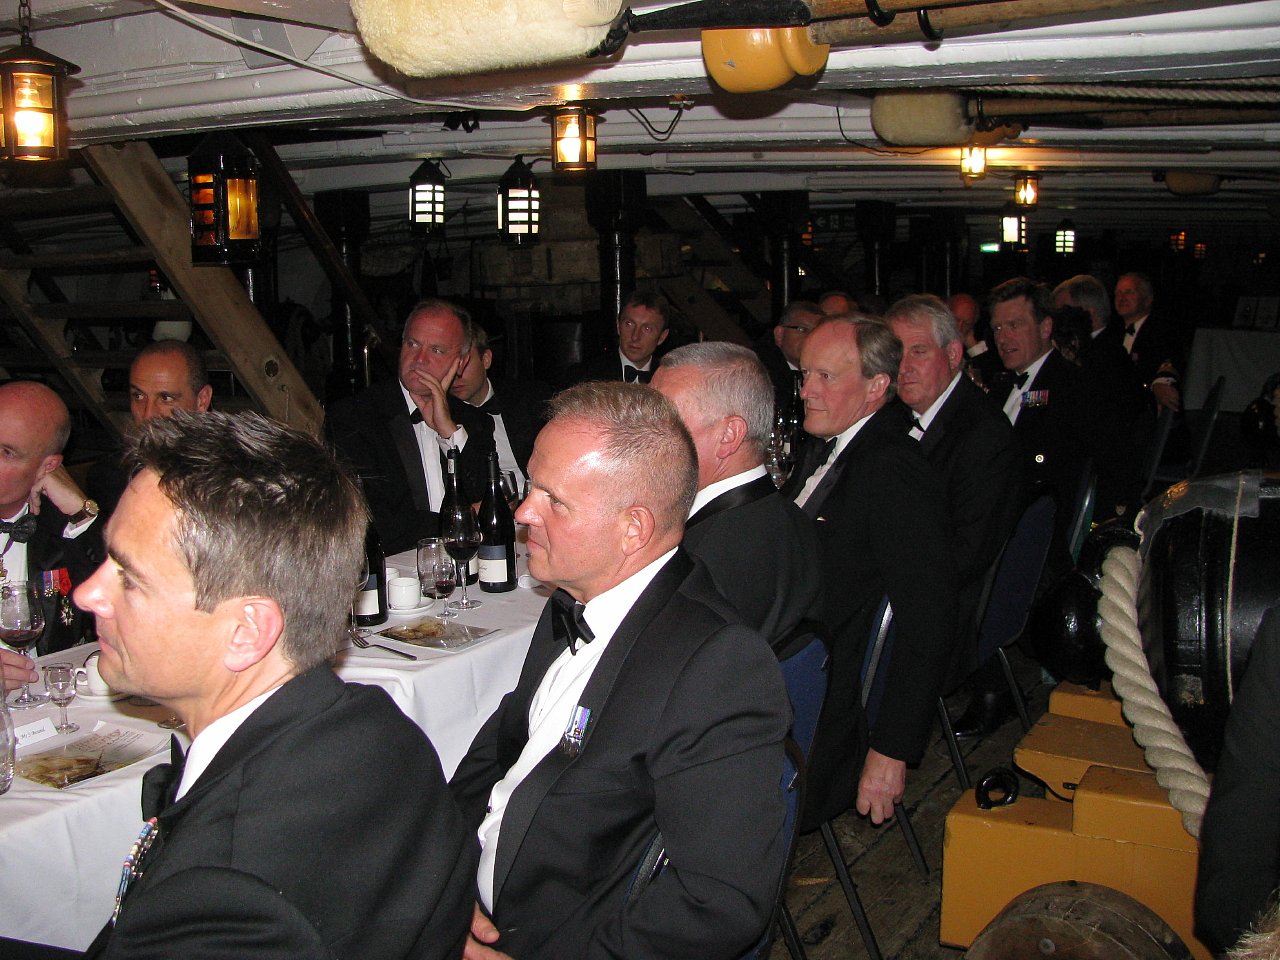 Project+Vernon+charity+dinner+on+board+HMS+Victory+11+Sep+2014+(83).jpg